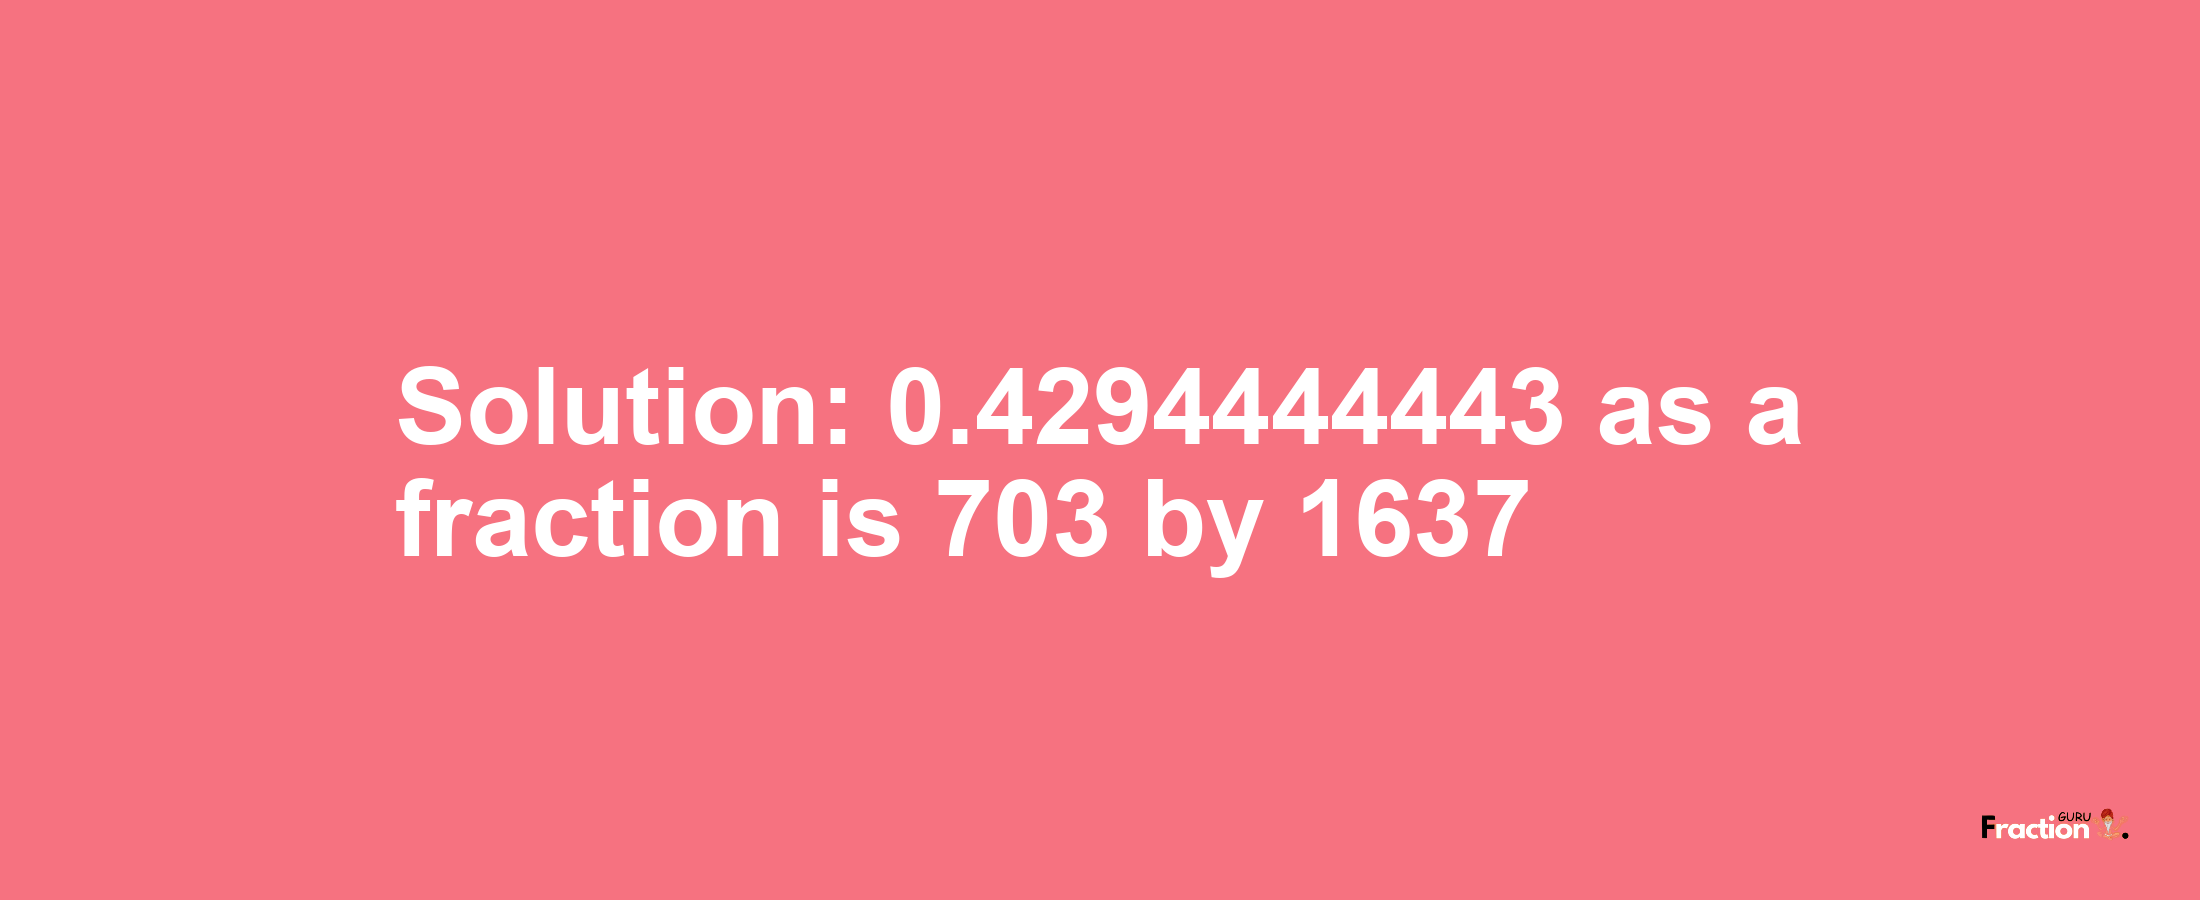 Solution:0.4294444443 as a fraction is 703/1637